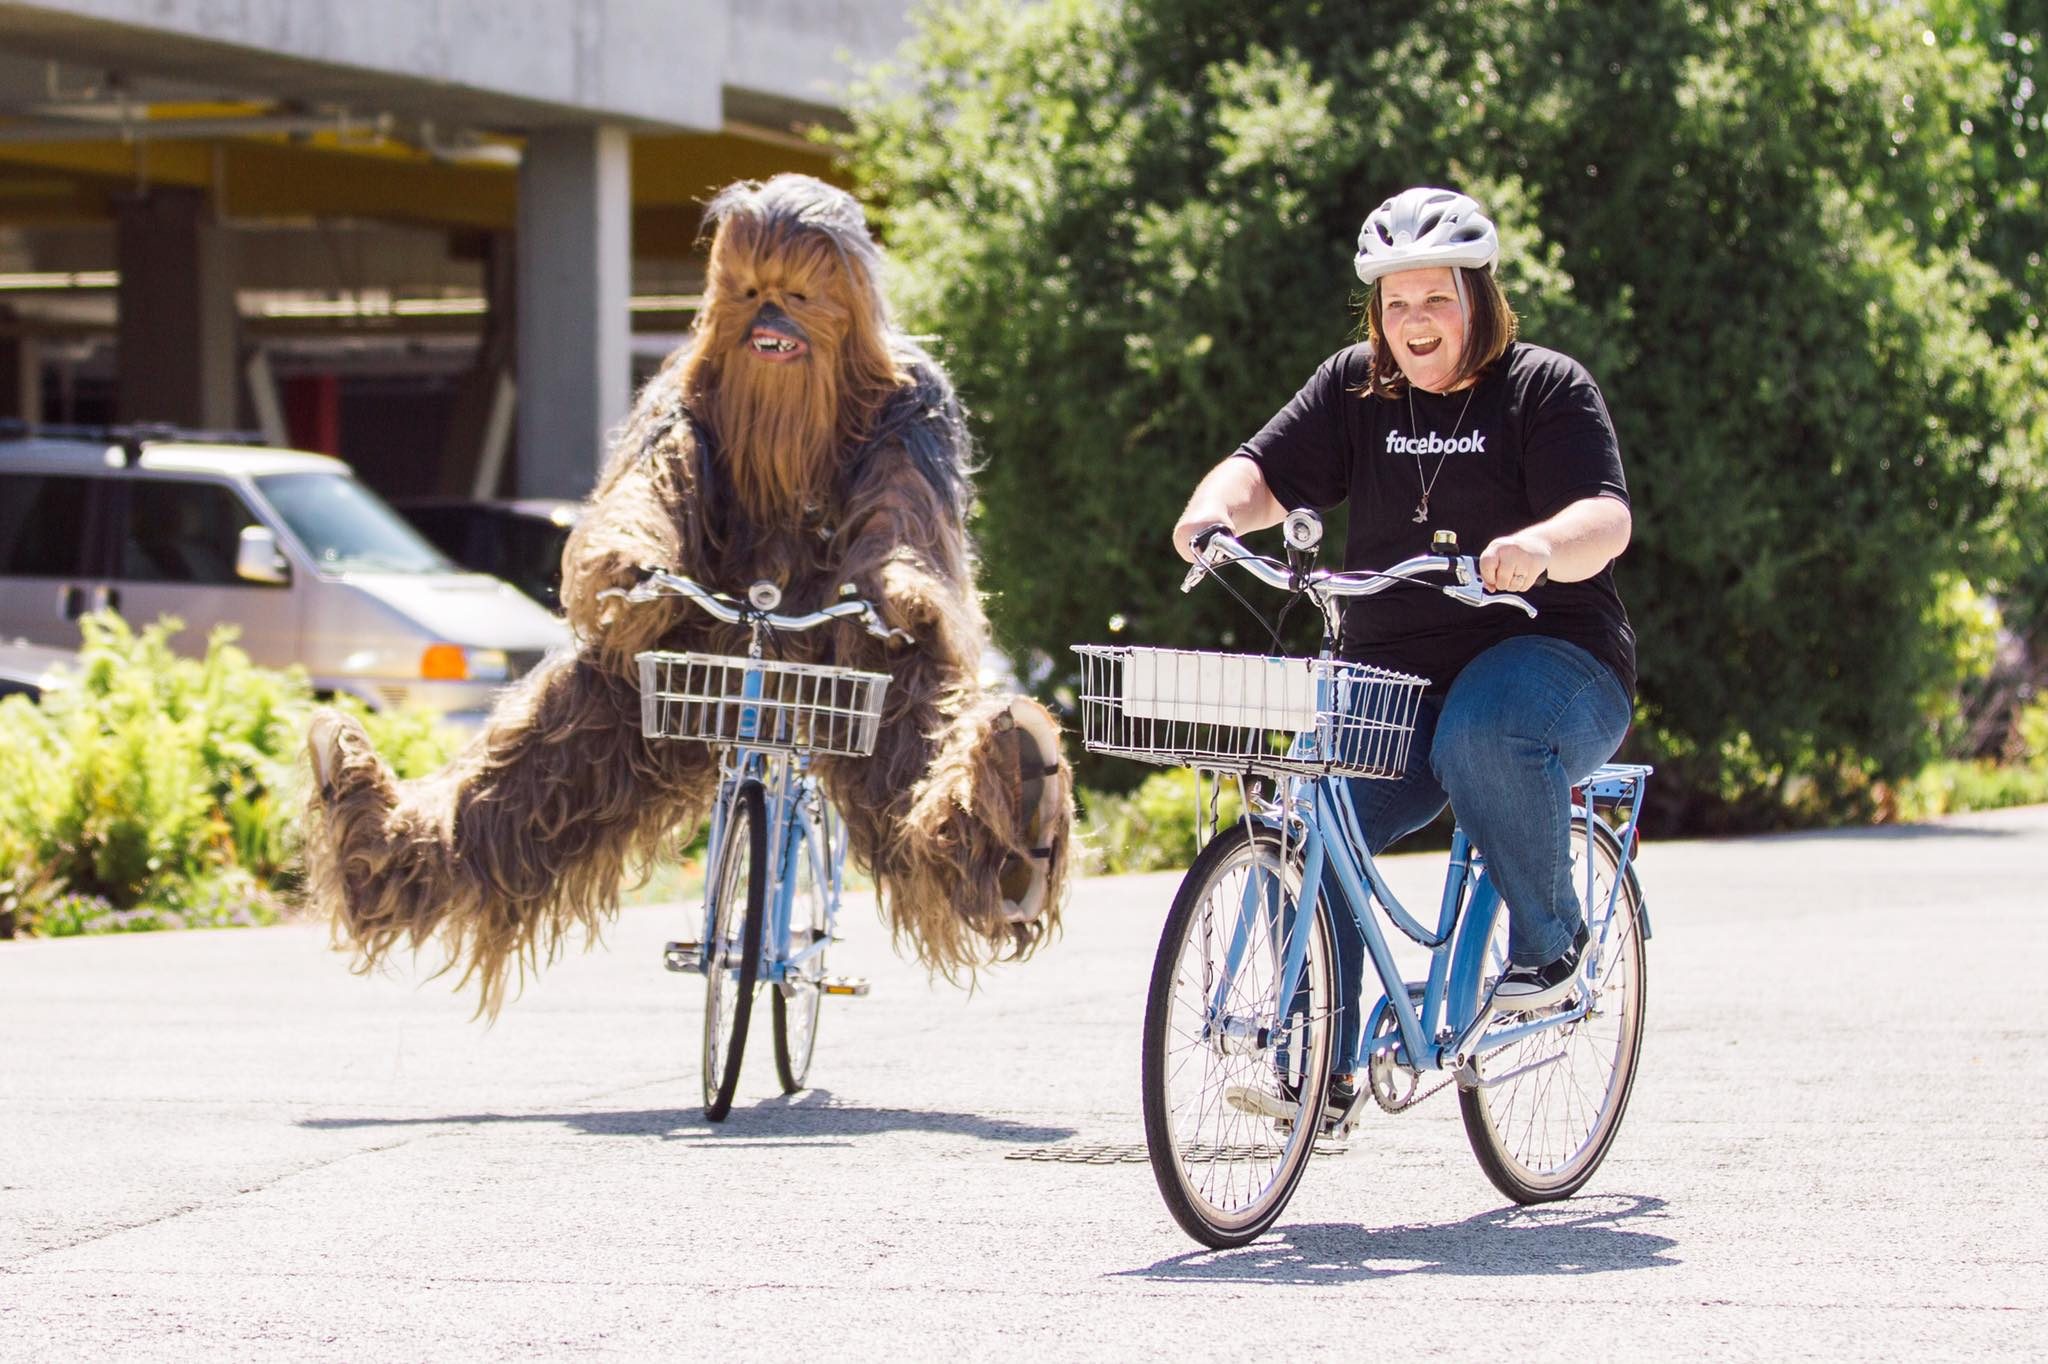 IN PHOTOS: ‘Chewbacca Mom’ visits Facebook HQ, meets Chewbacca